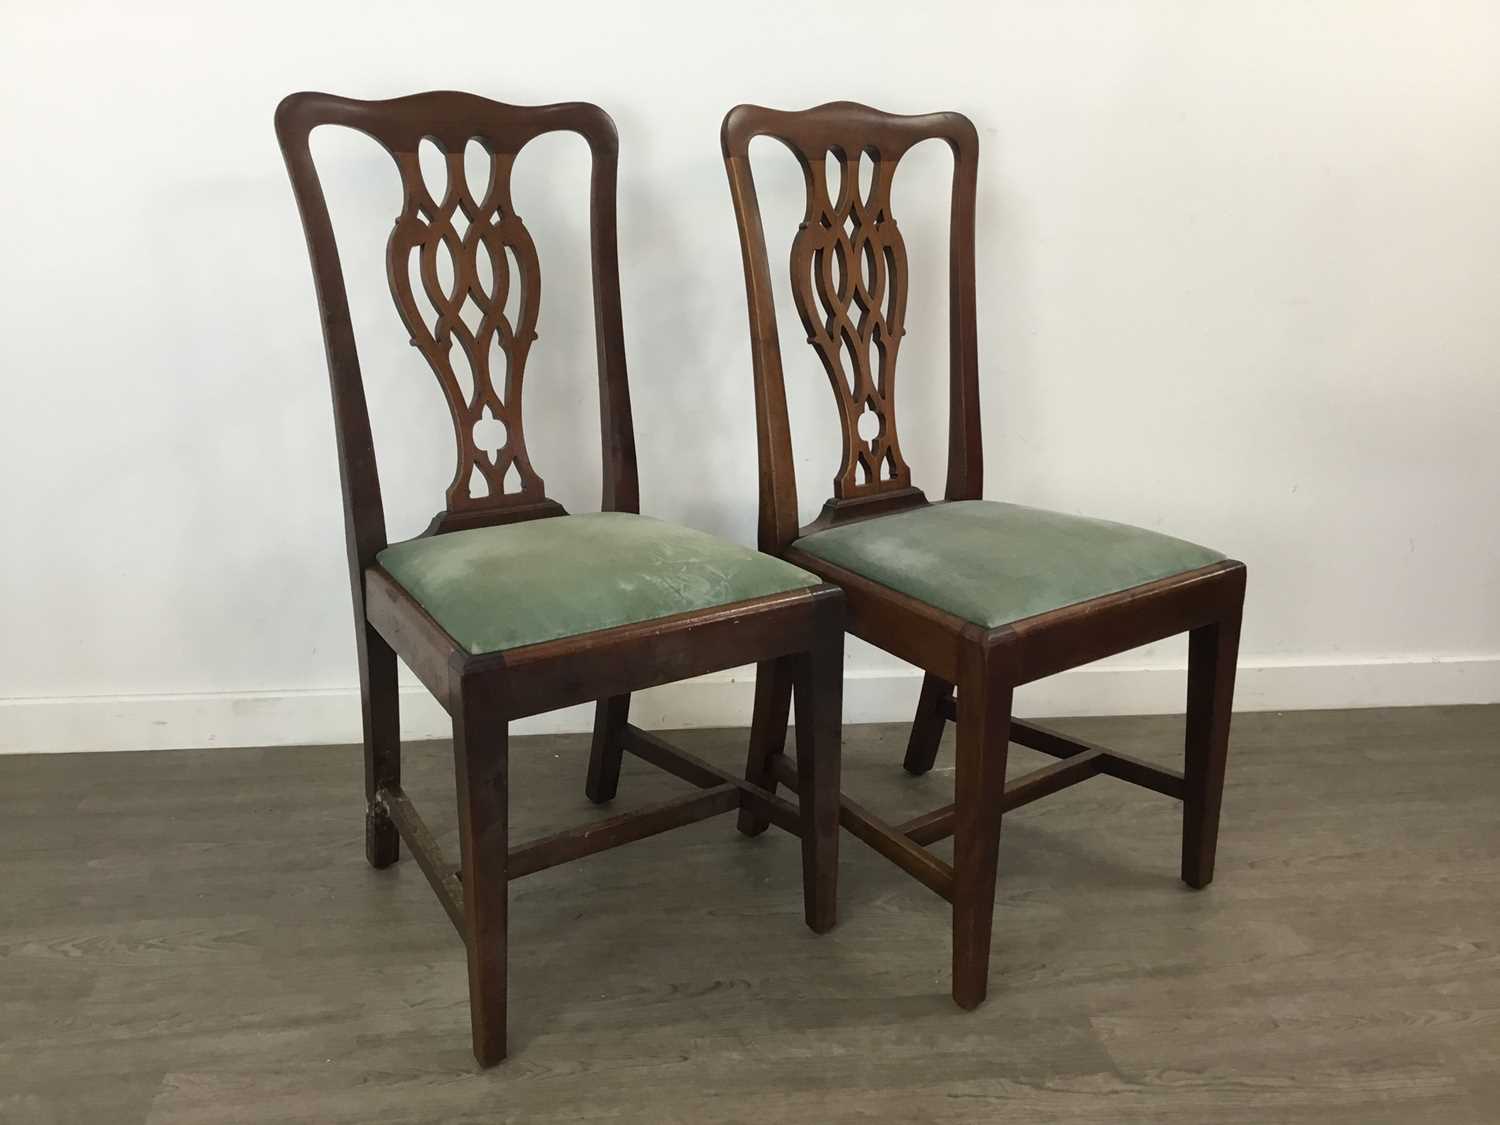 A SET OF SIX CHIPPENDALE STYLE MAHOGANY DINING CHAIRS - Image 3 of 3